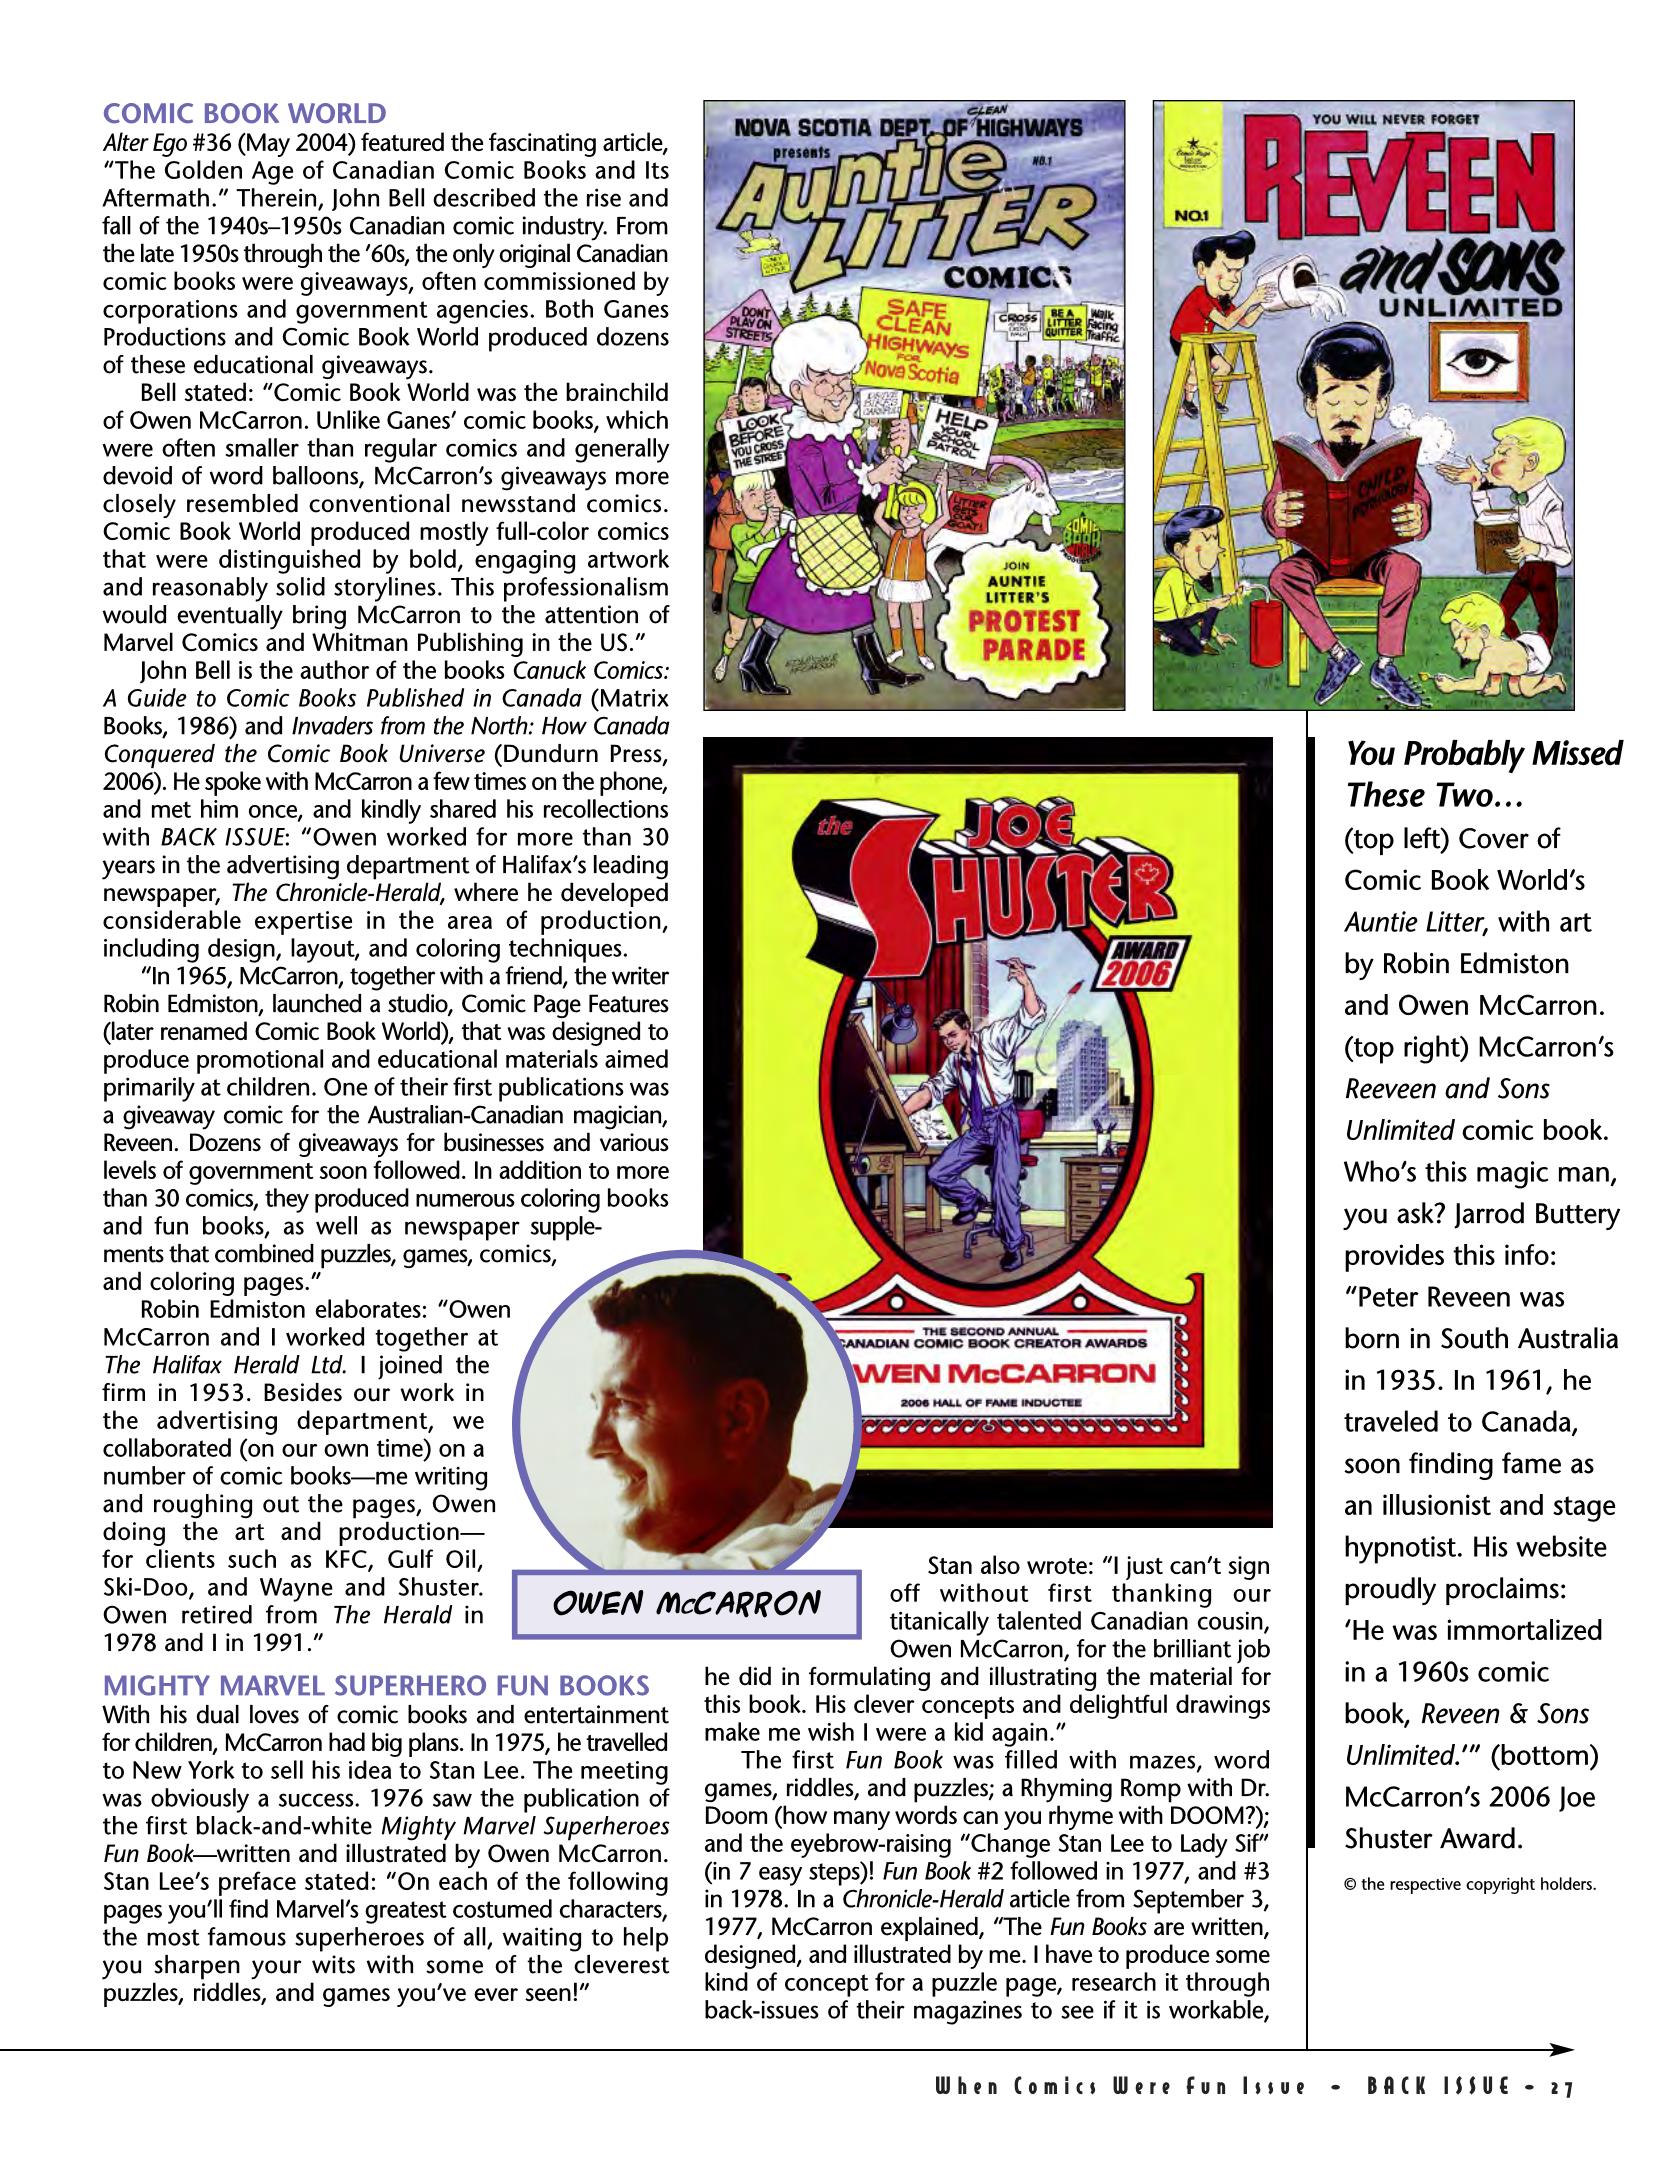 Read online Back Issue comic -  Issue #77 - 22